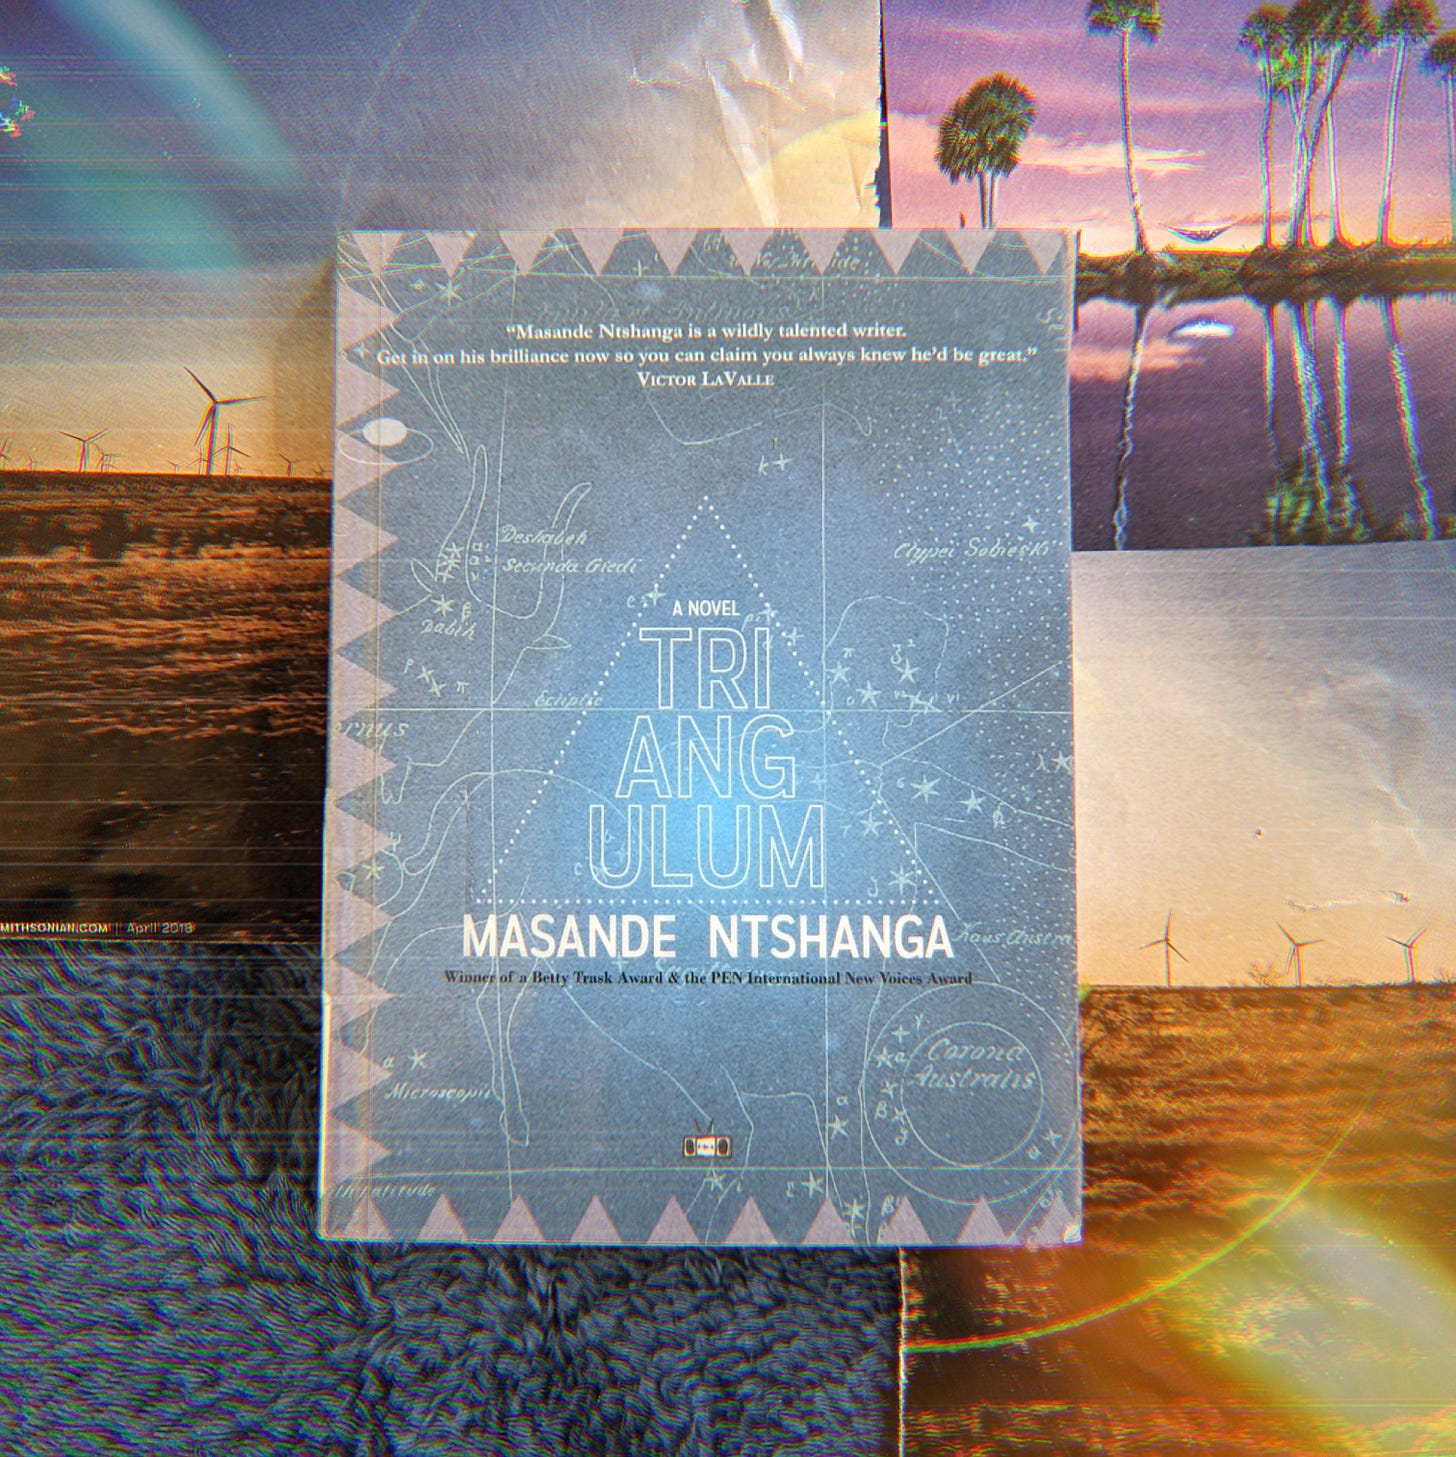 Blue book on top of magazine cutouts of landscapes. The book is Triangulum by Masande Ntshanga.